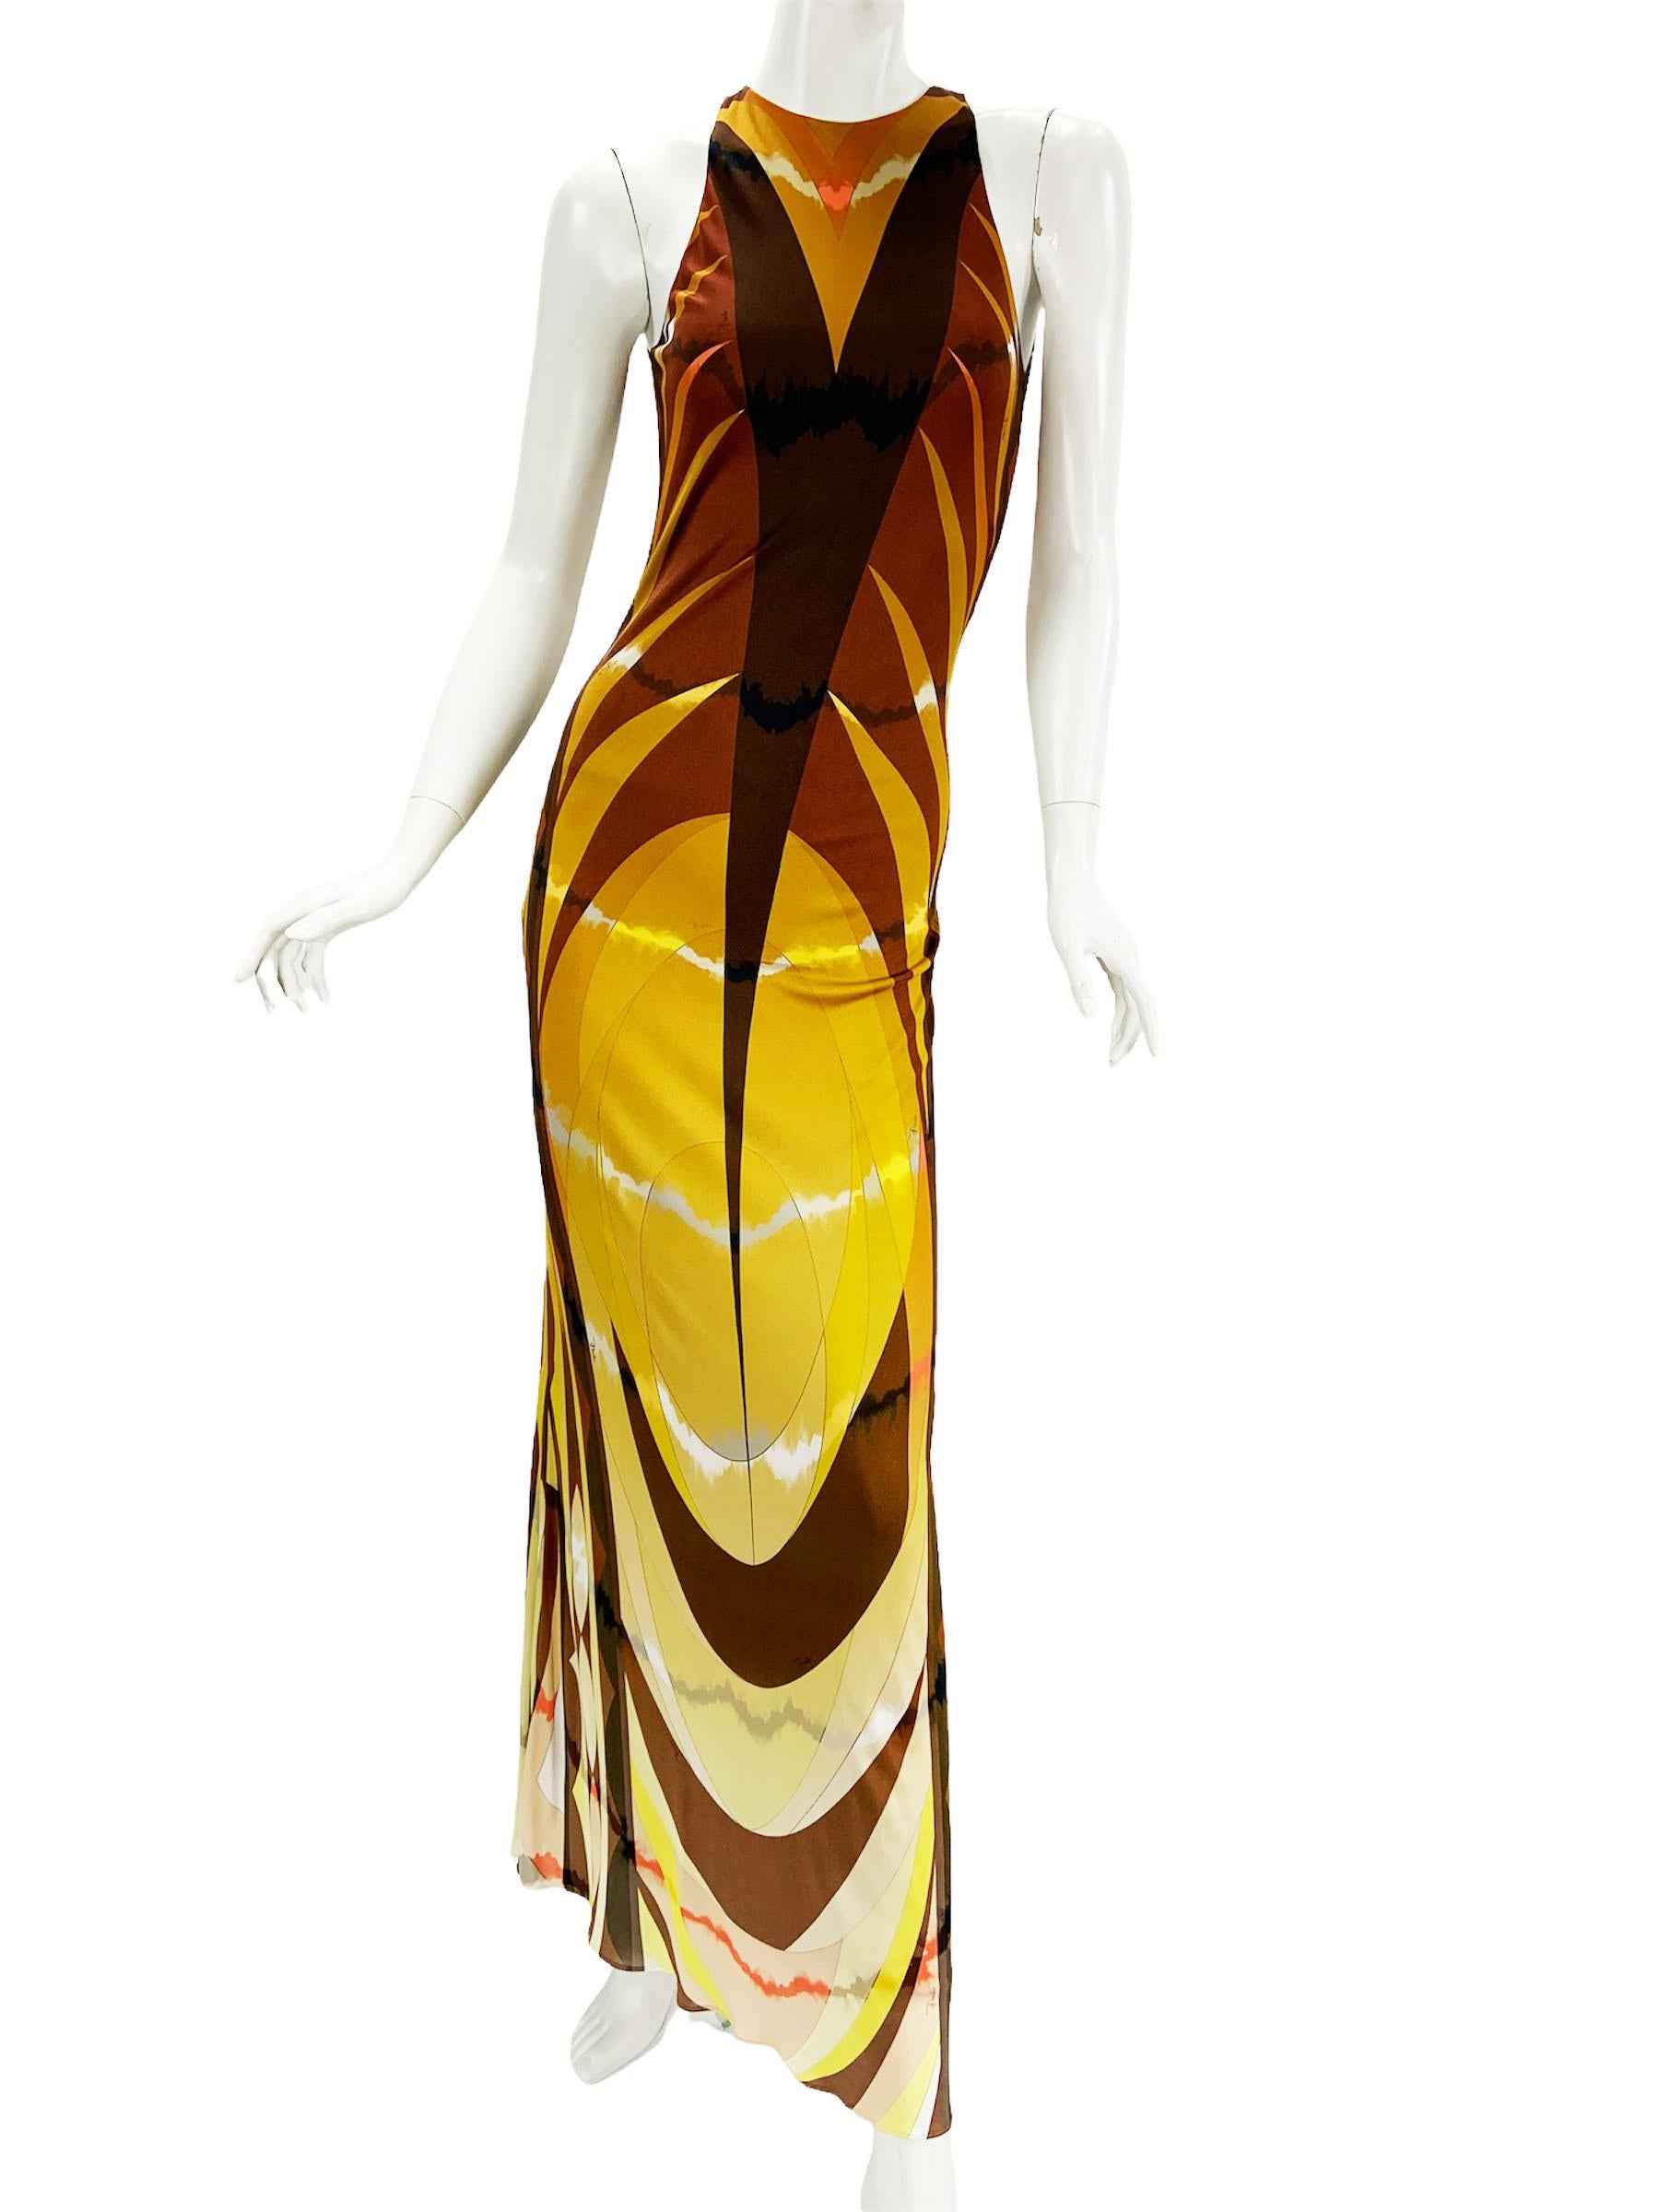 New Emilio Pucci Vintage Jersey Print Sexy Maxi Dress
Italian size 38 - US 4
Signature Designer Fabric Very Soft and Slinky, with Warm Sunset Colors. Halter Neck Style, Sexy Open Back, Fully Lined, Slip-On, Stretchy.
Measurements: Length - 60